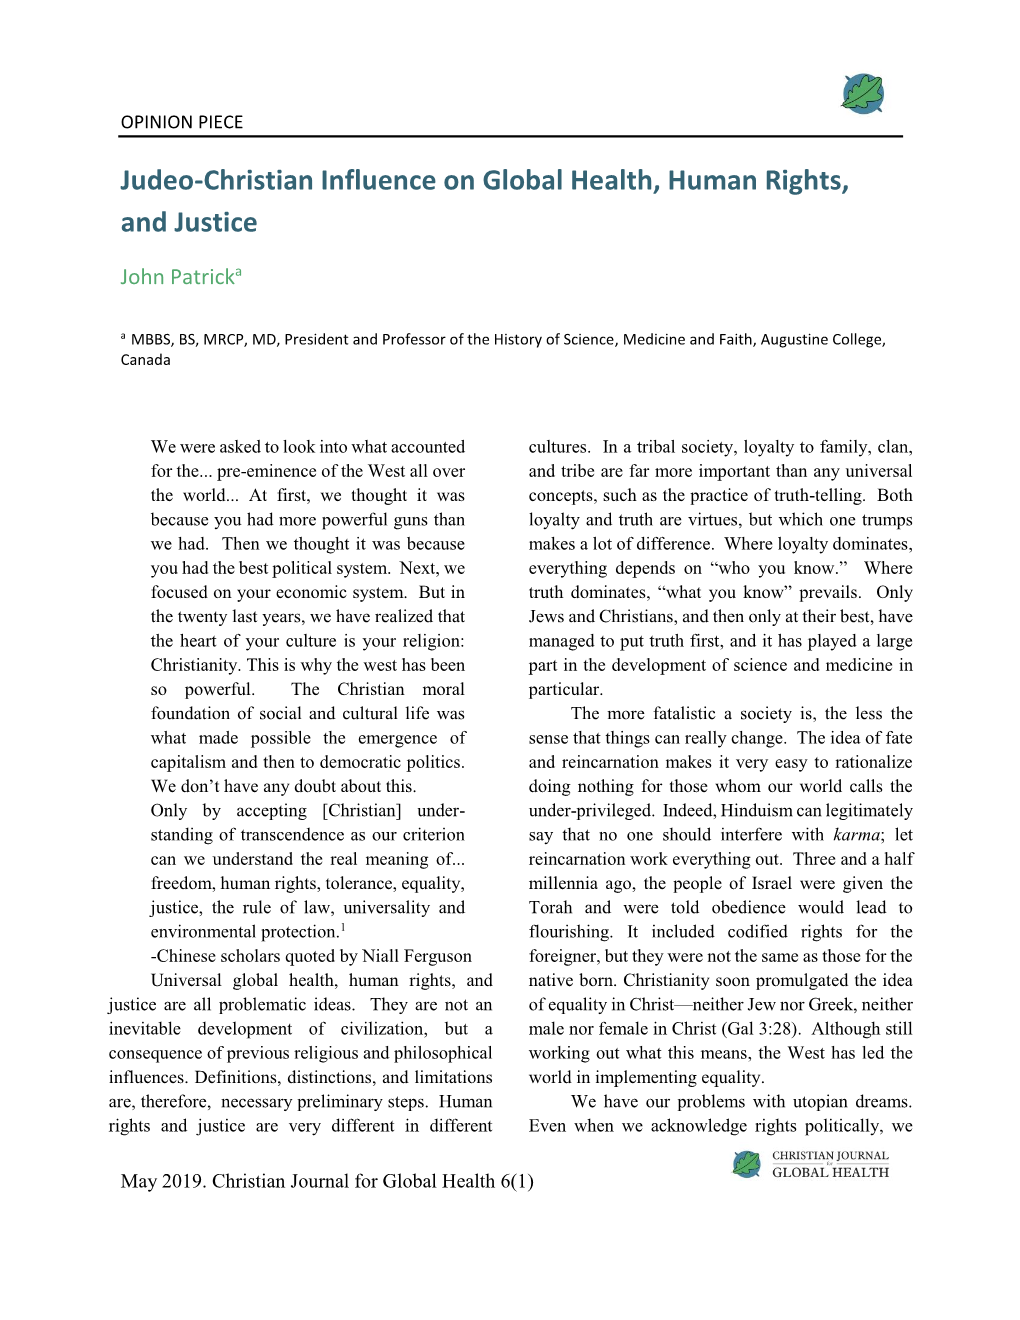 Judeo-Christian Influence on Global Health, Human Rights, and Justice